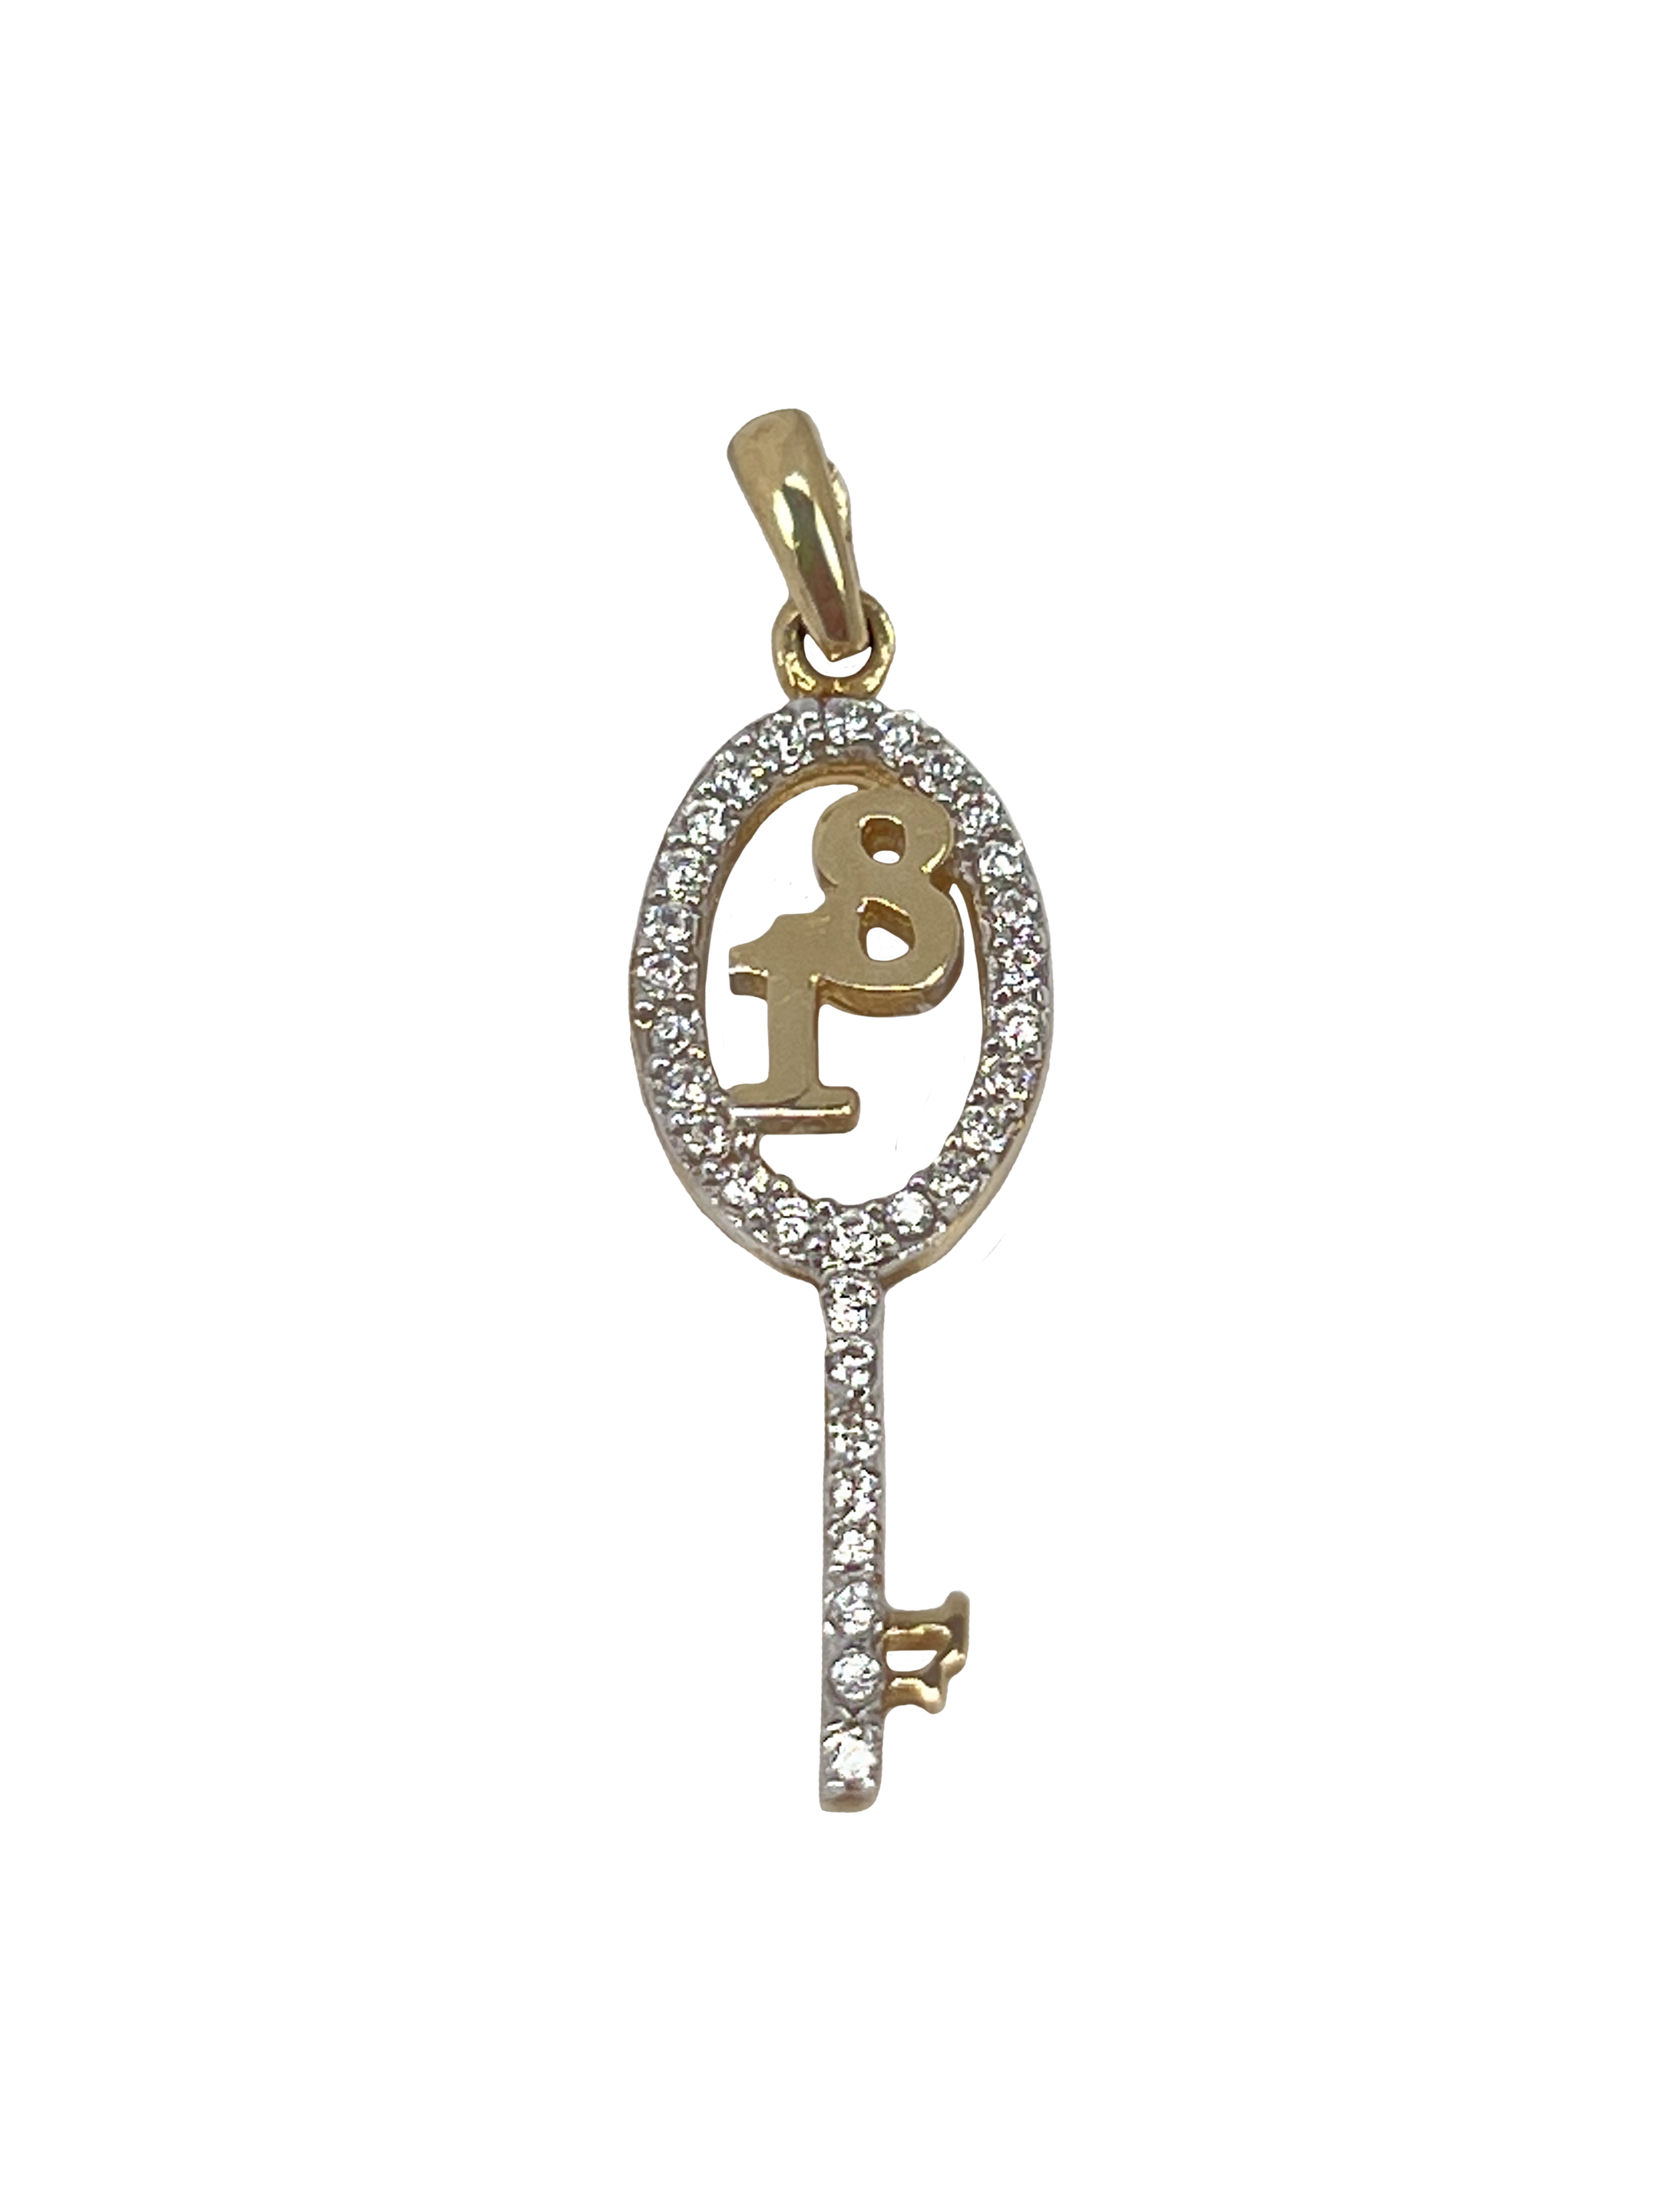 Golden key pendant with number 18 in yellow gold